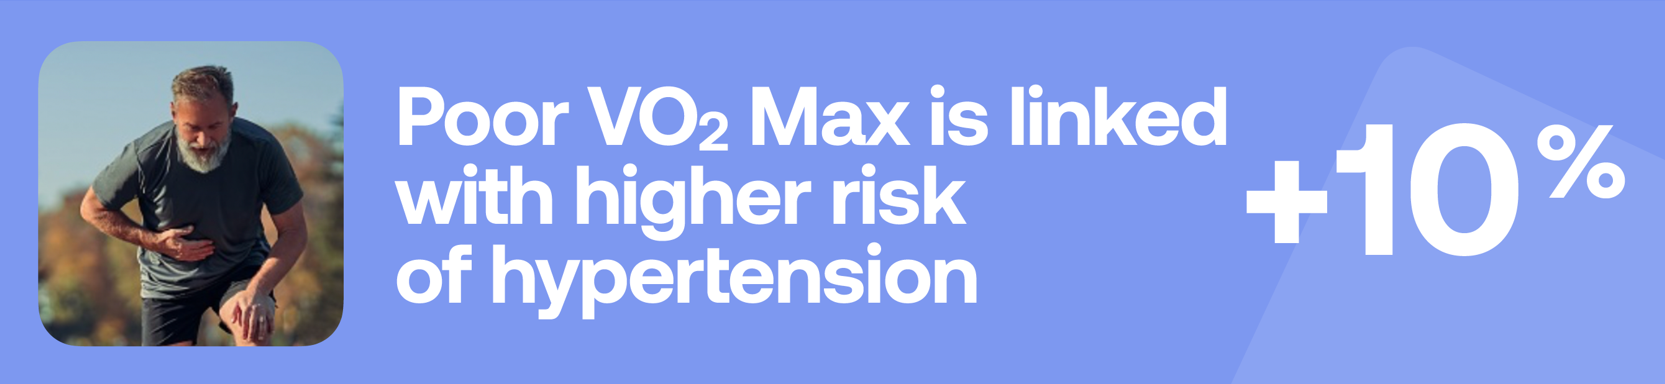 Poor VO₂ Max is linked with higher risk of hypertension +10%